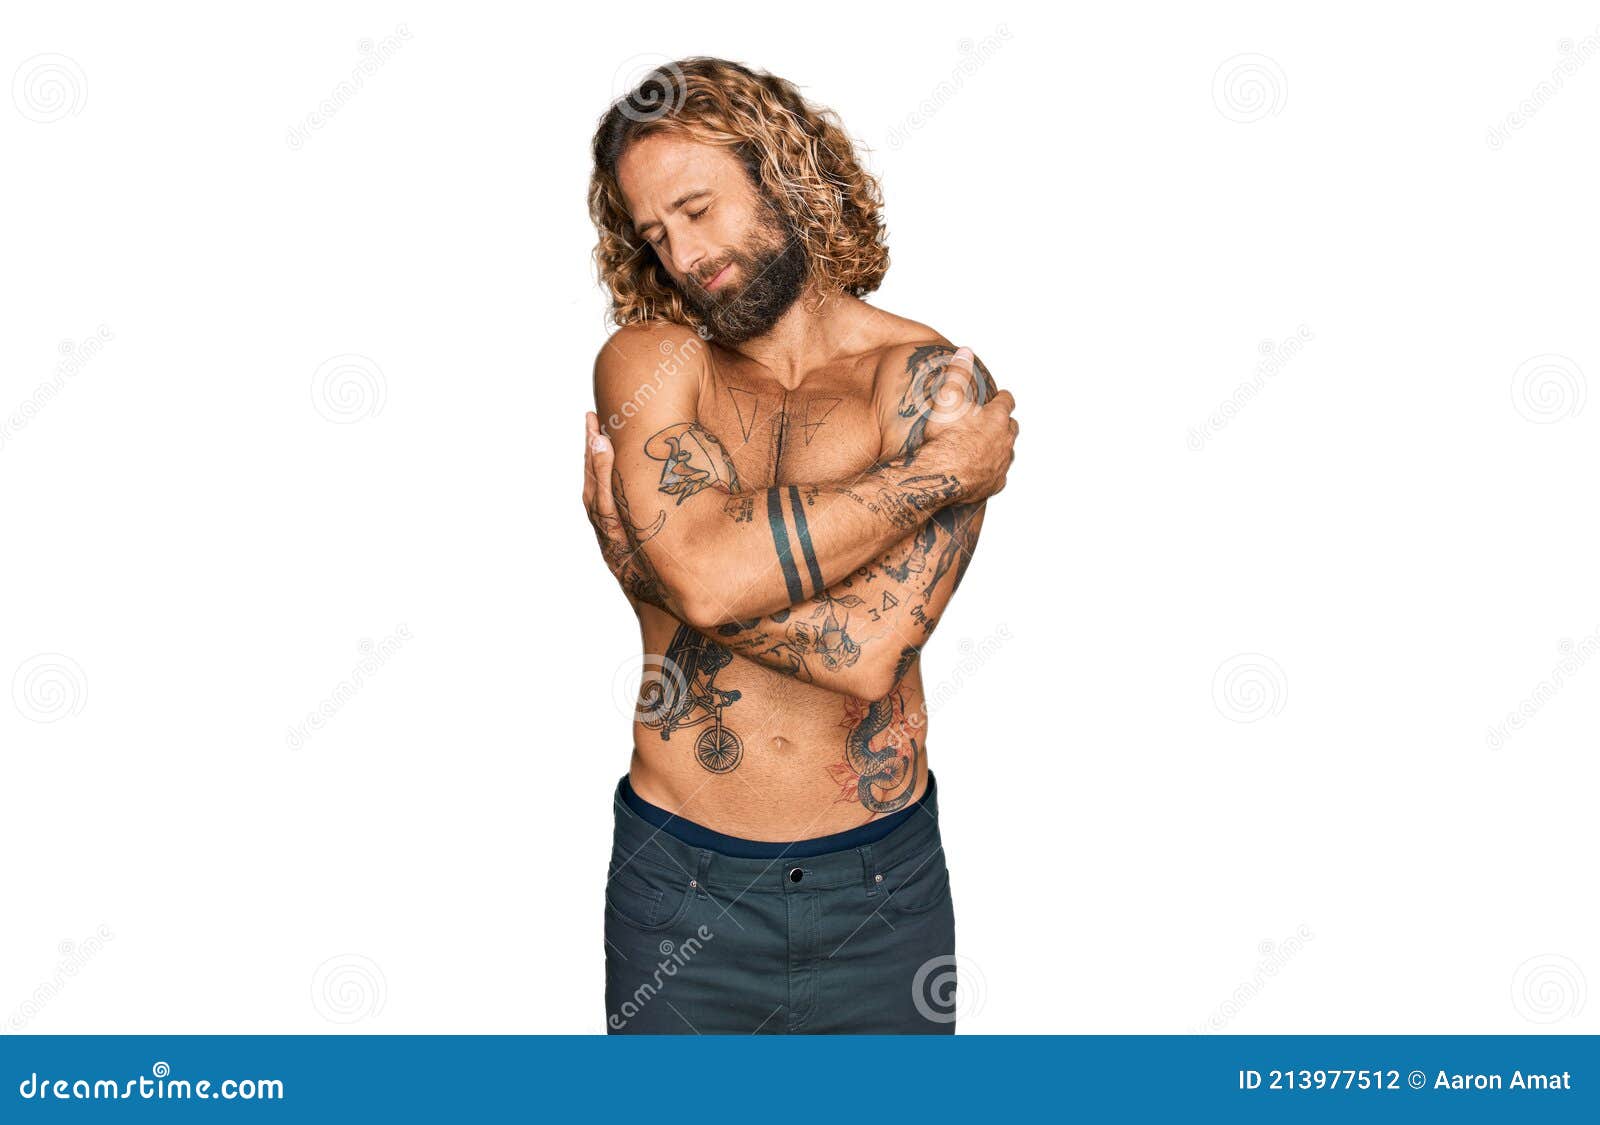 Handsome Man with Beard and Long Hair Standing Shirtless Showing Tattoos  Hugging Oneself Happy and Positive, Smiling Confident Stock Photo - Image  of beard, muscle: 213977512